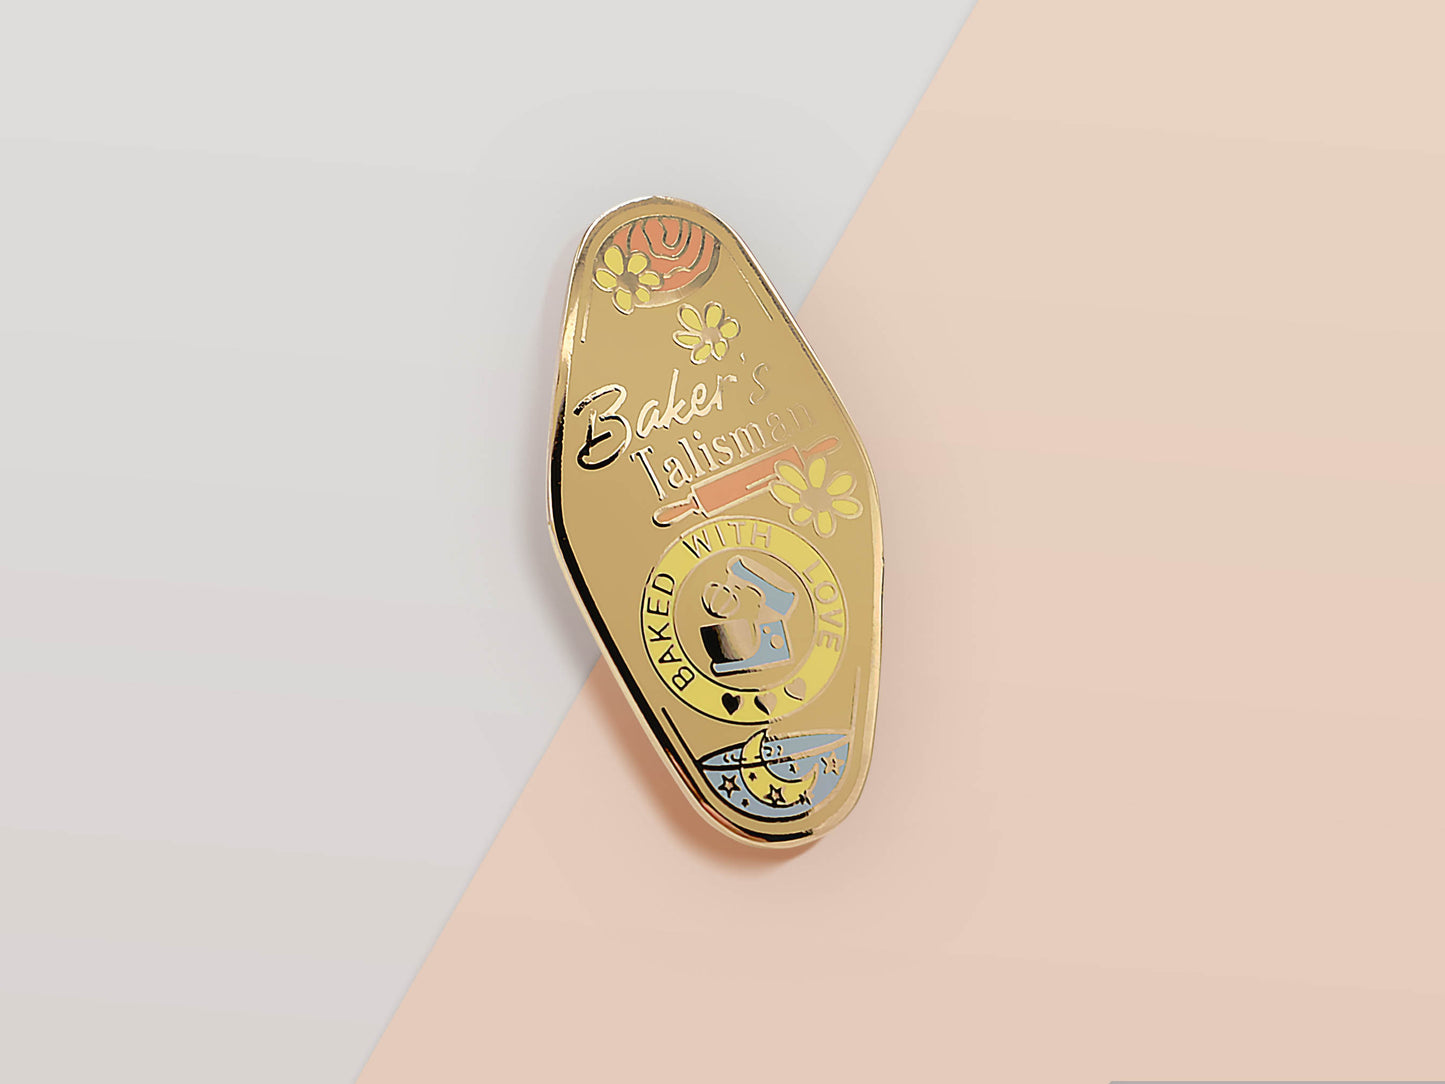 Gold Enamel Talisman Pin with yellow design and the words baker's Talisman, Baked With Love. The pins design includes a mixer and a rolling pin, moon water, as well as flowers and crystals.